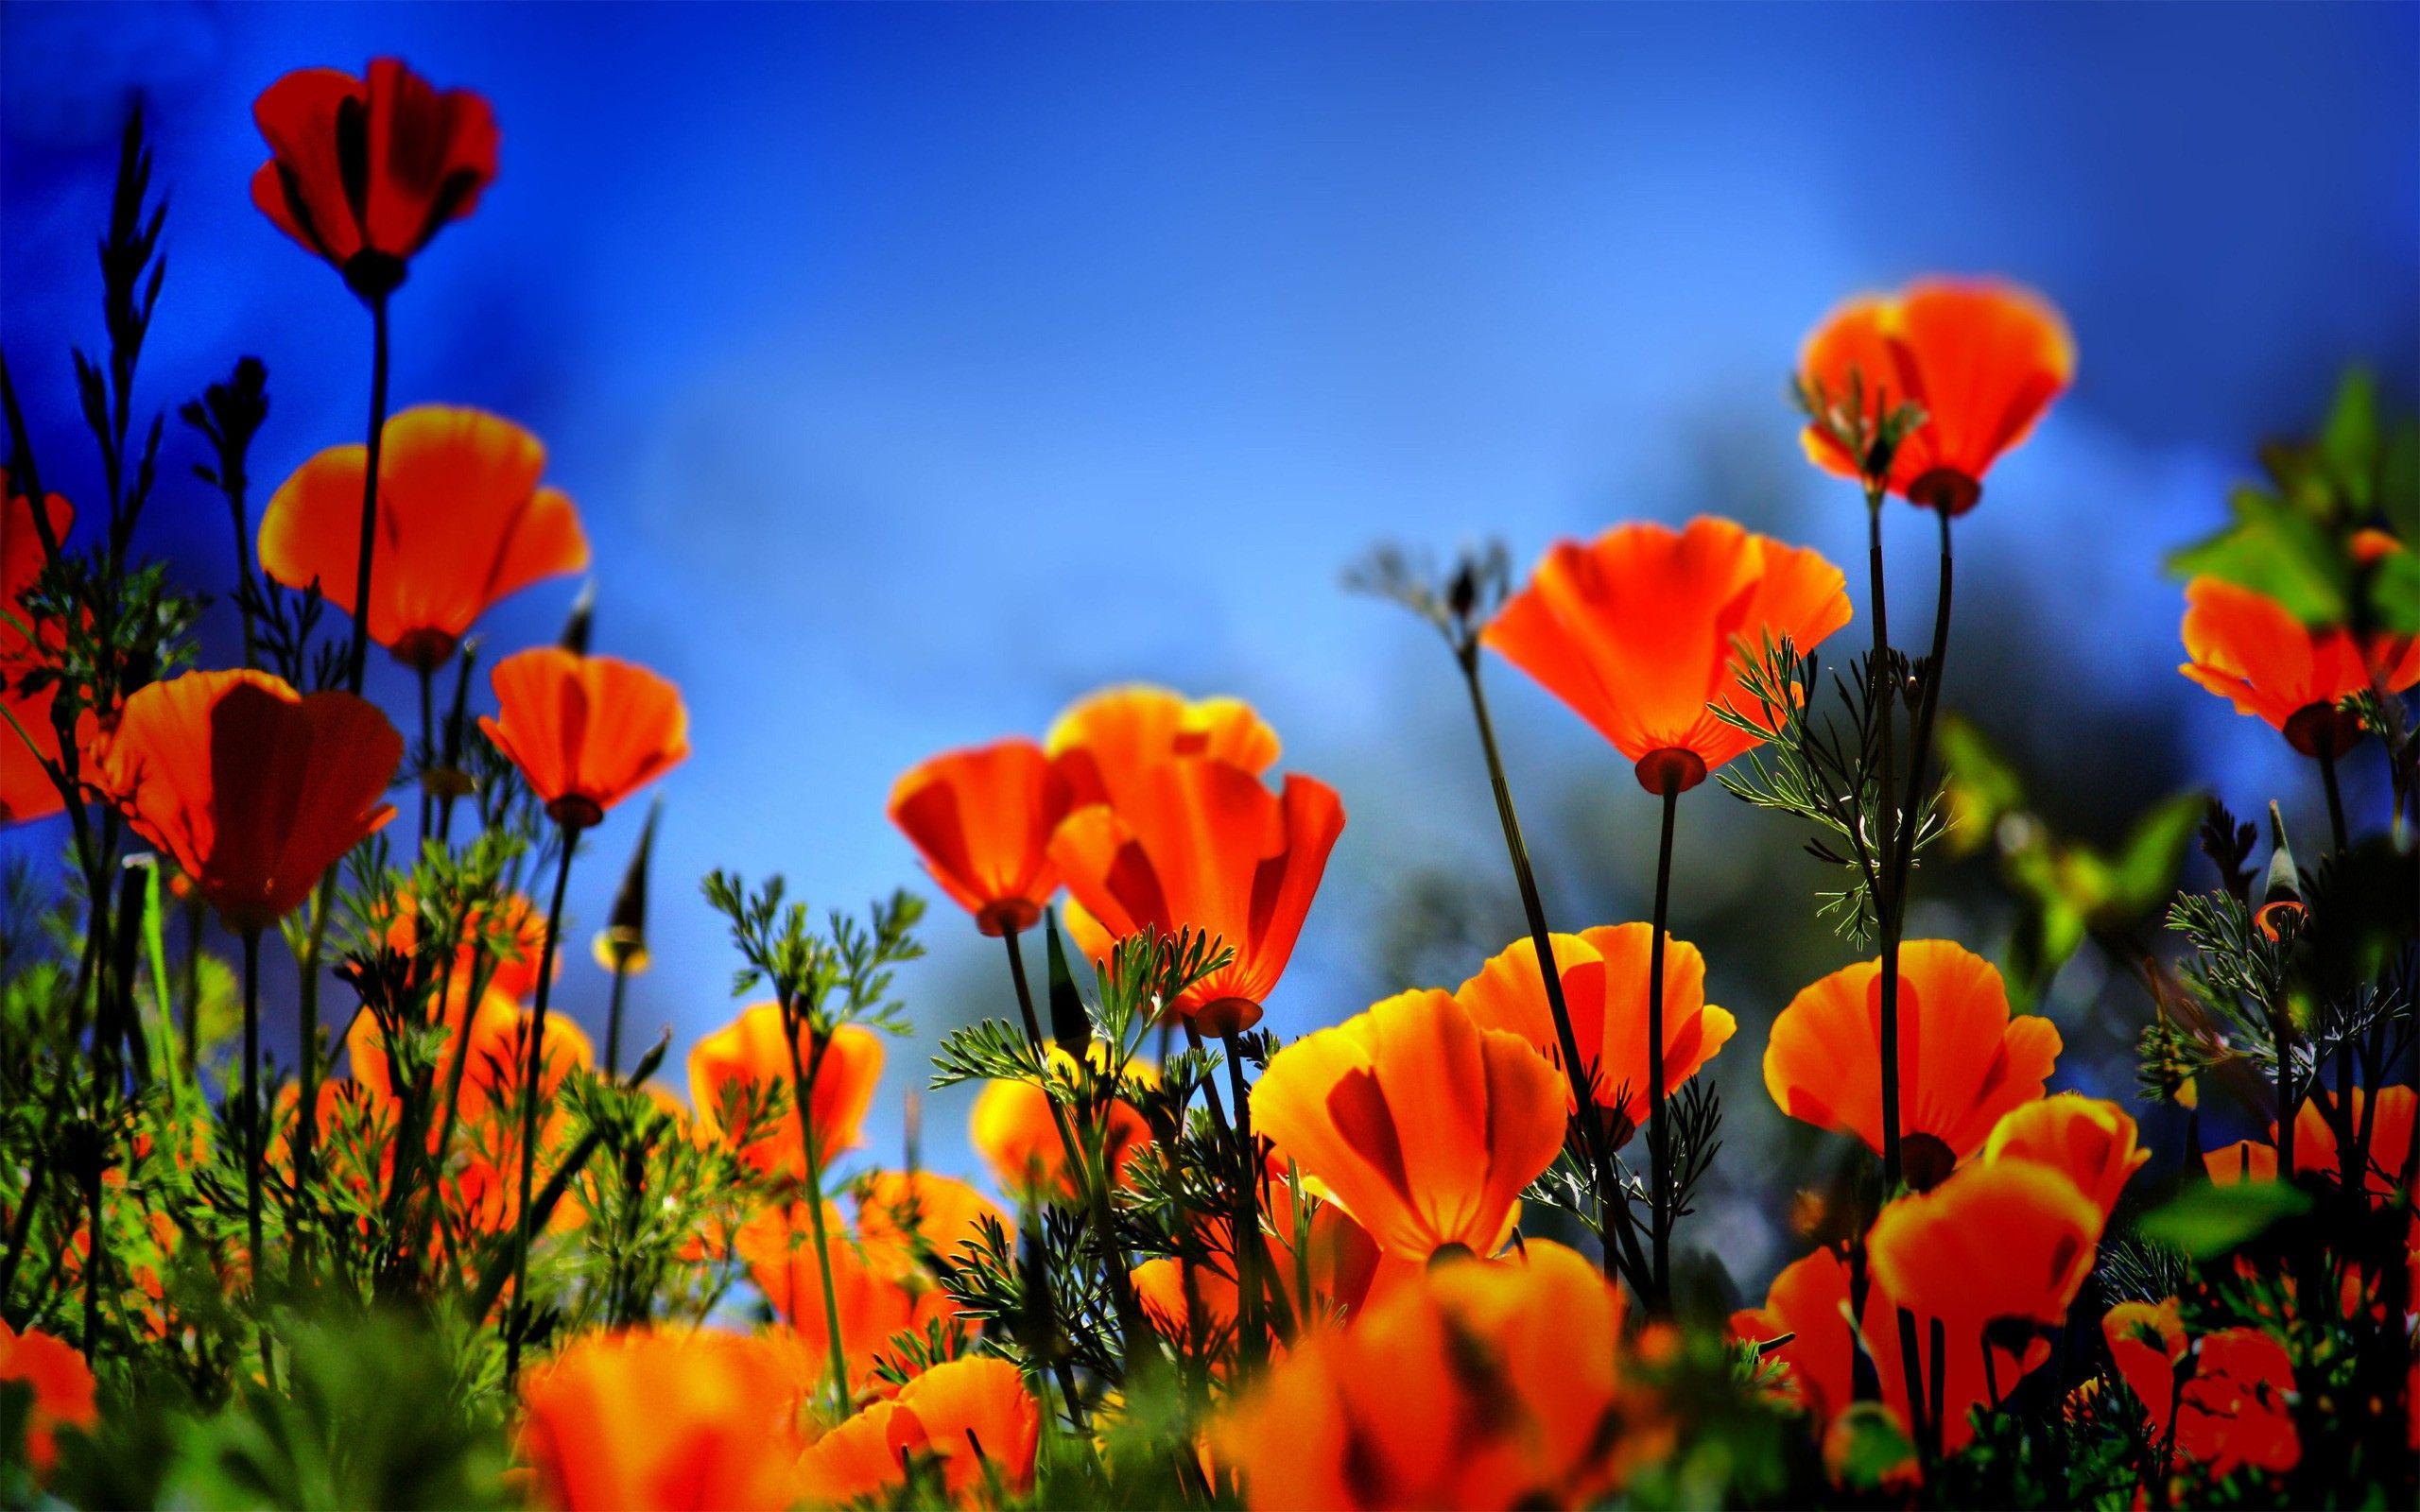 poppy flower image and wallpaper Download